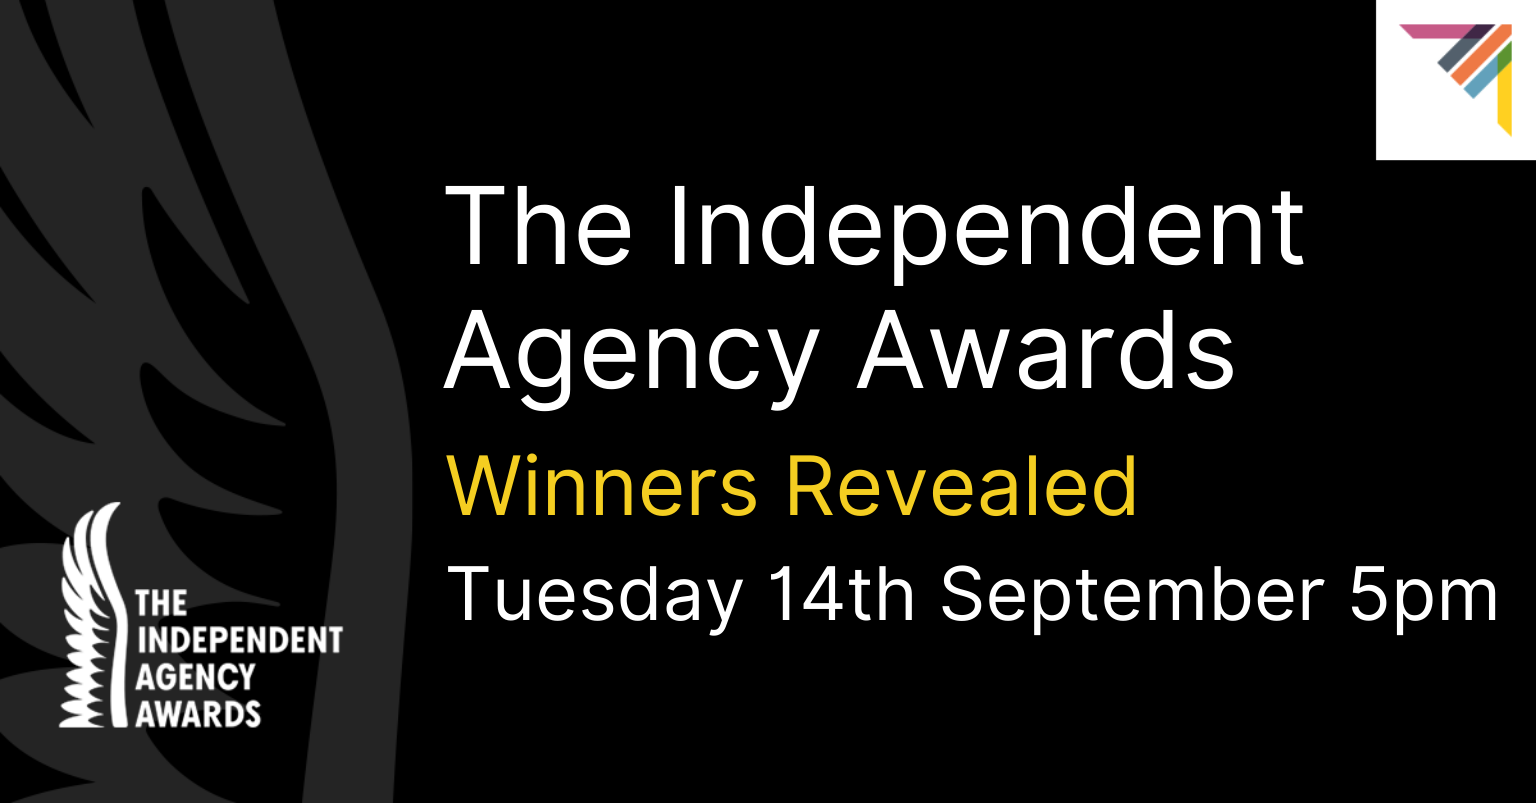 The Independent Agency Awards - Winners Revealed